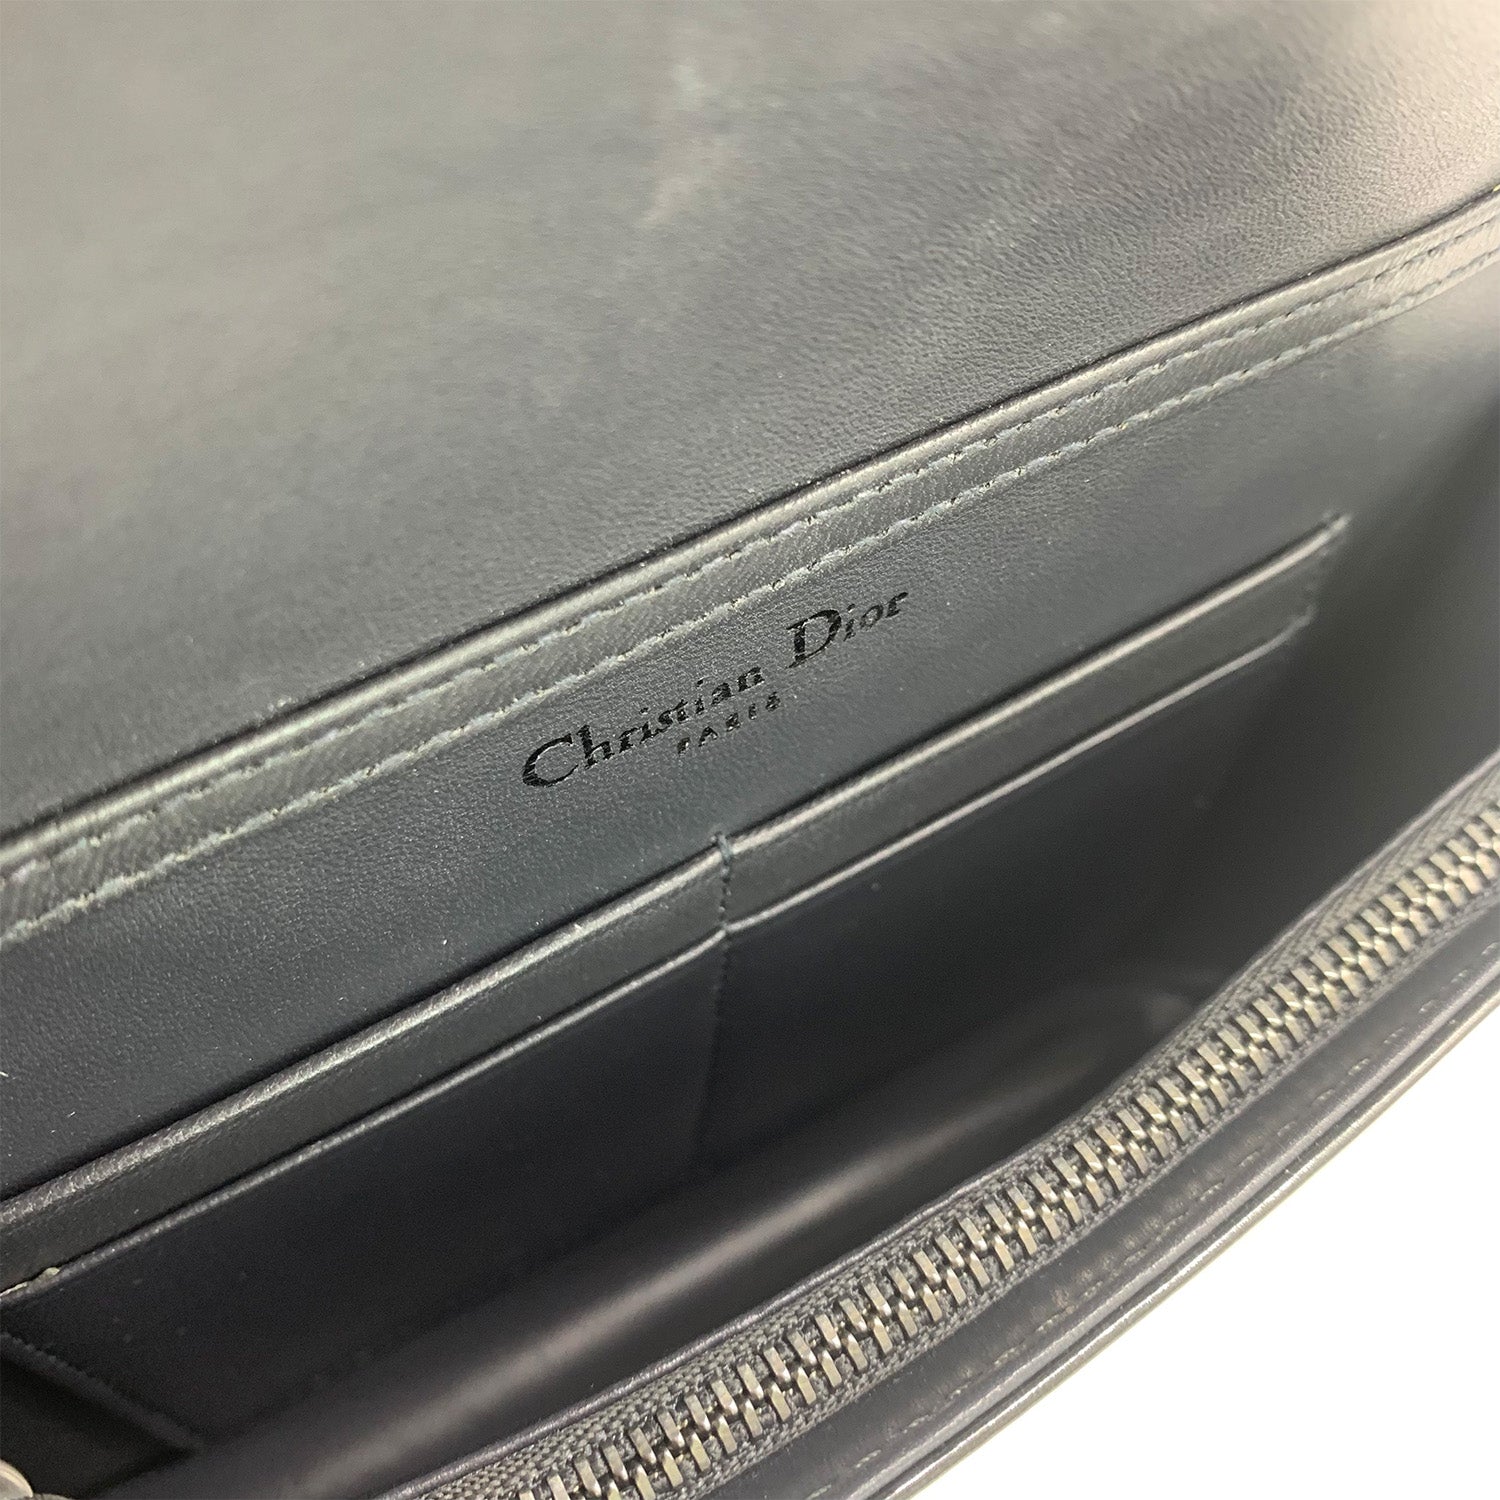 Dior Diorama Bag and Lady Dior Patent Wallet Review and Photos